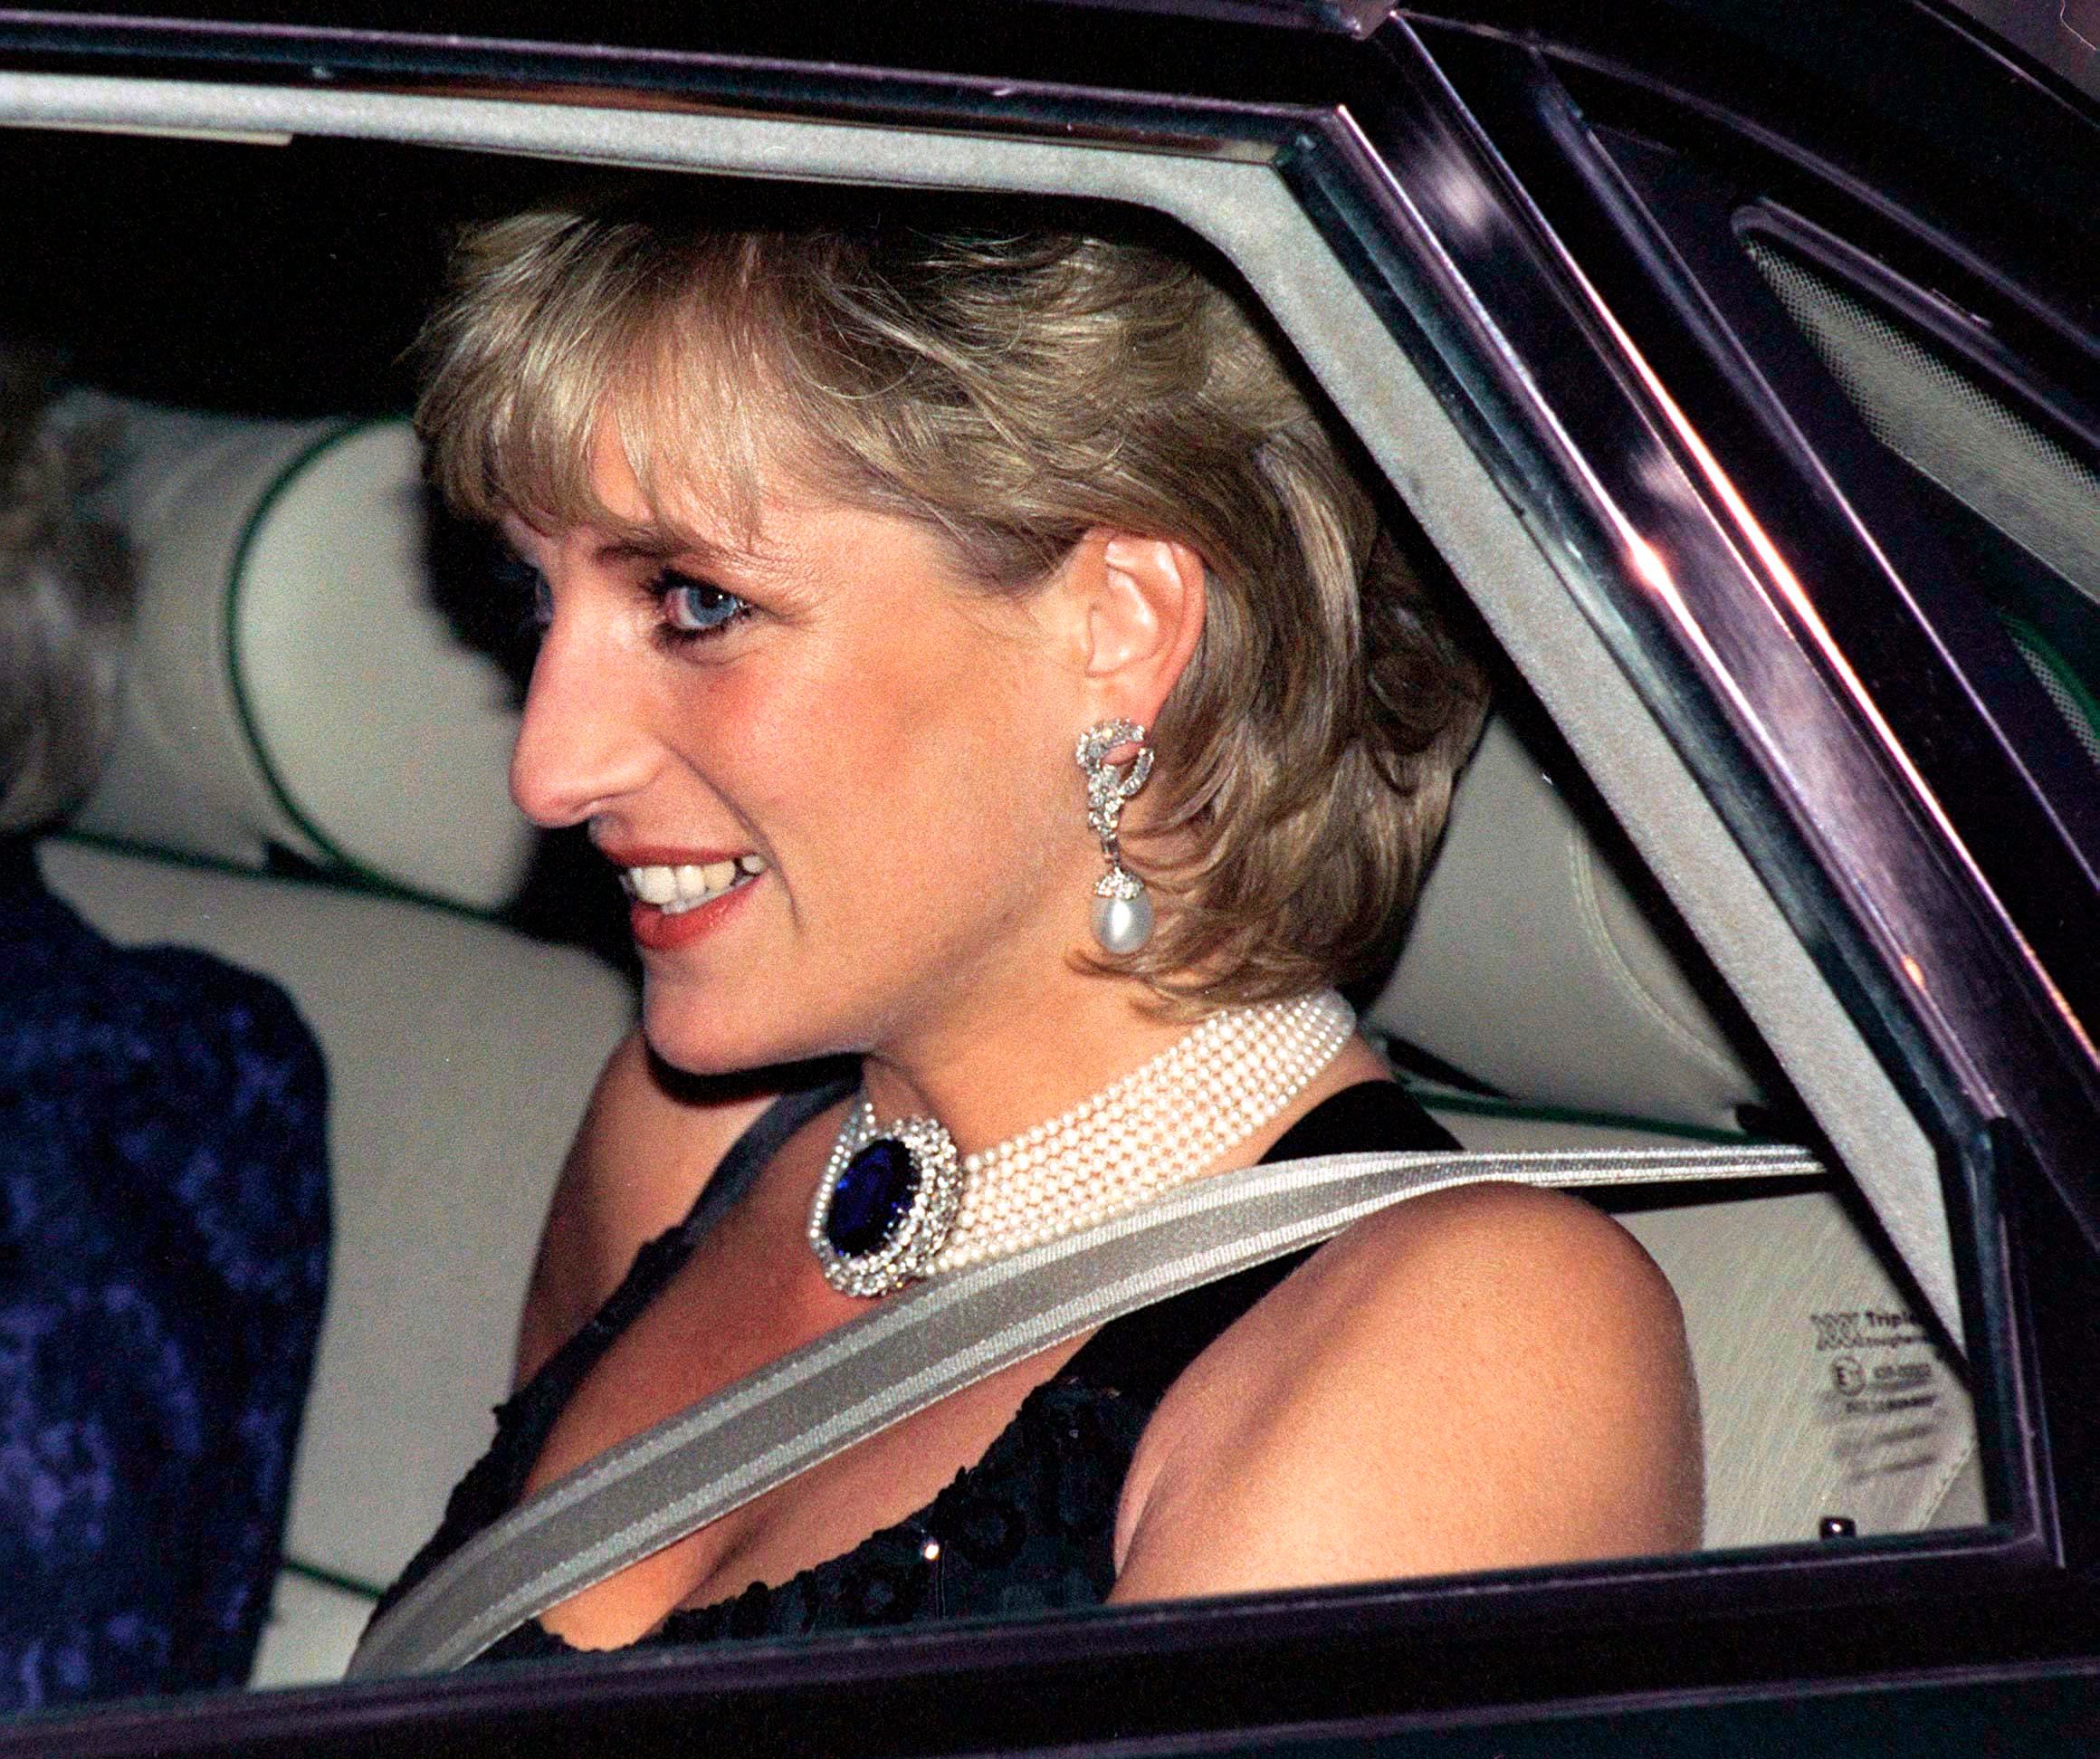 Princess Diana in the back of car with a seatbelt on